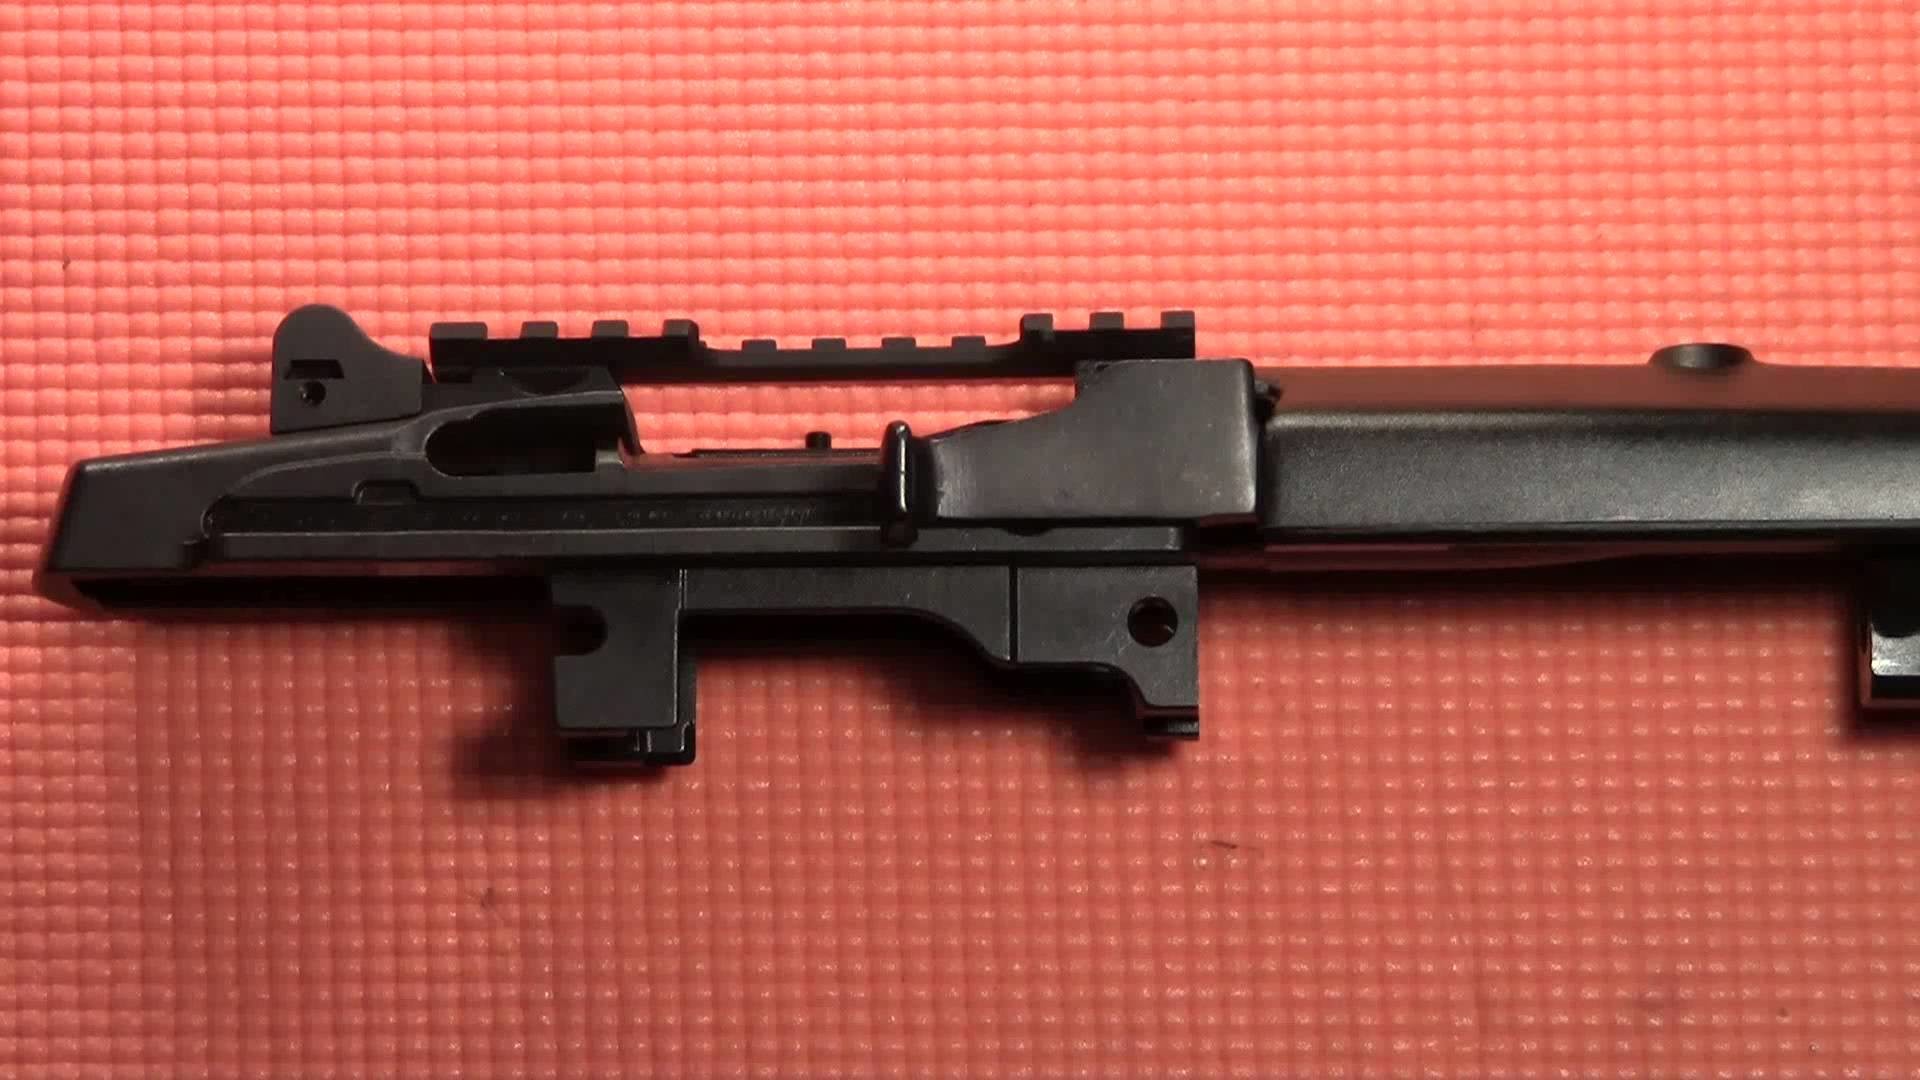 1920x1080 How to disassemble a ruger mini 14 or mini 30 rifle